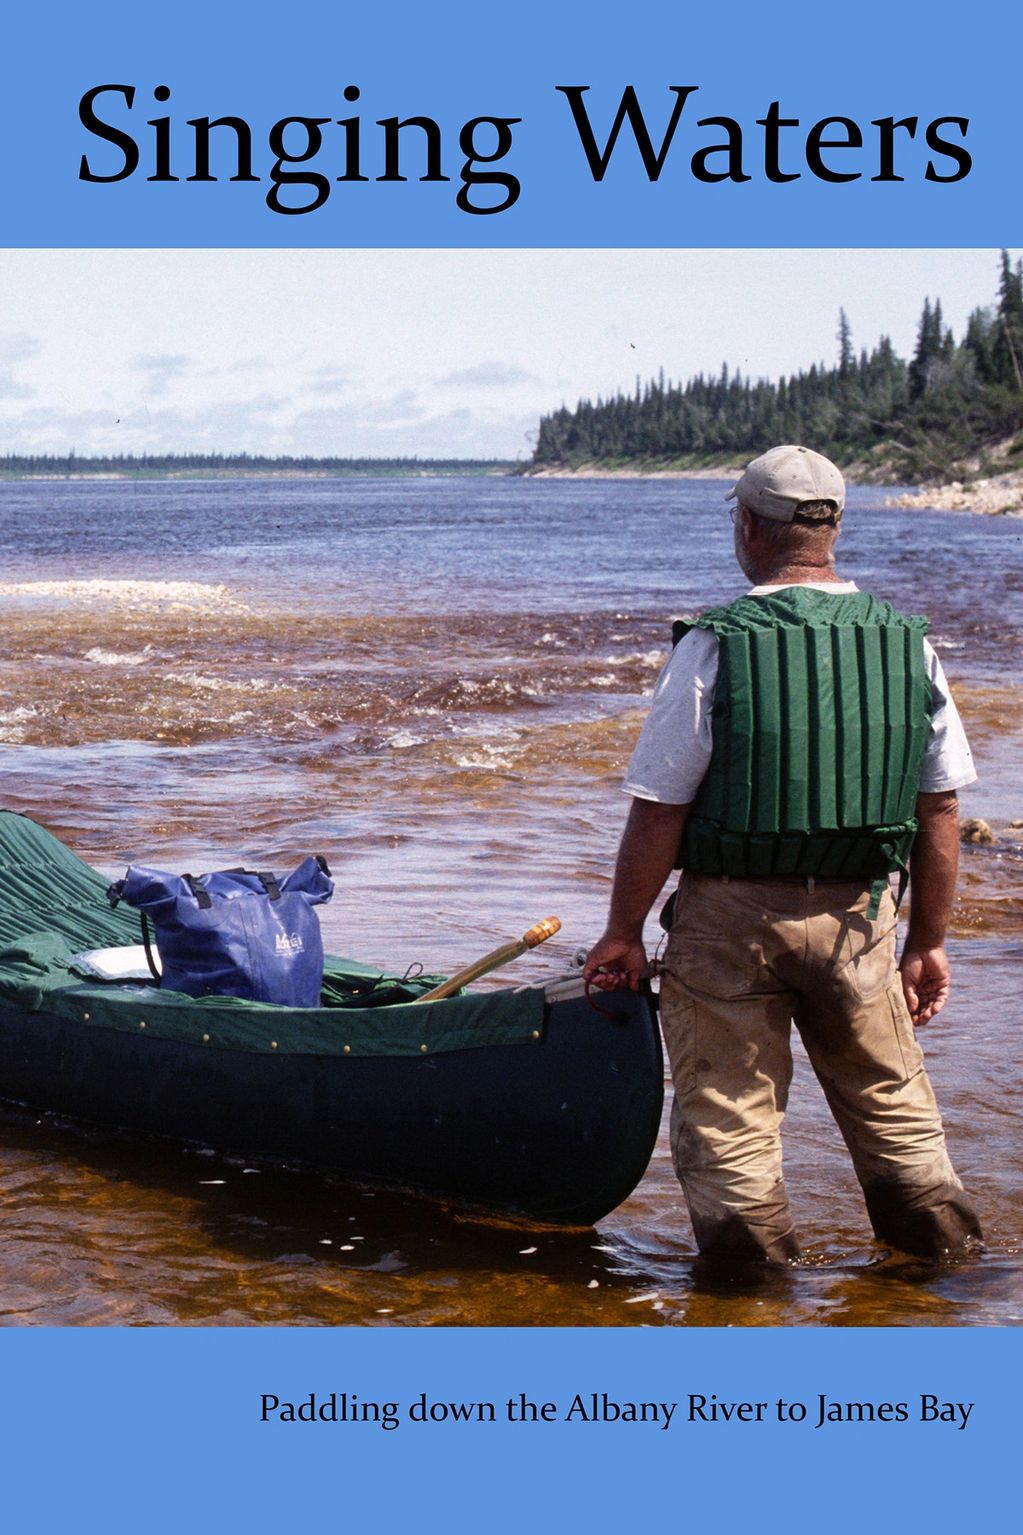 Paddle down the Albany River to Hudson Bay with me and my buddy Tom. Whitewater, fishing, adventure 